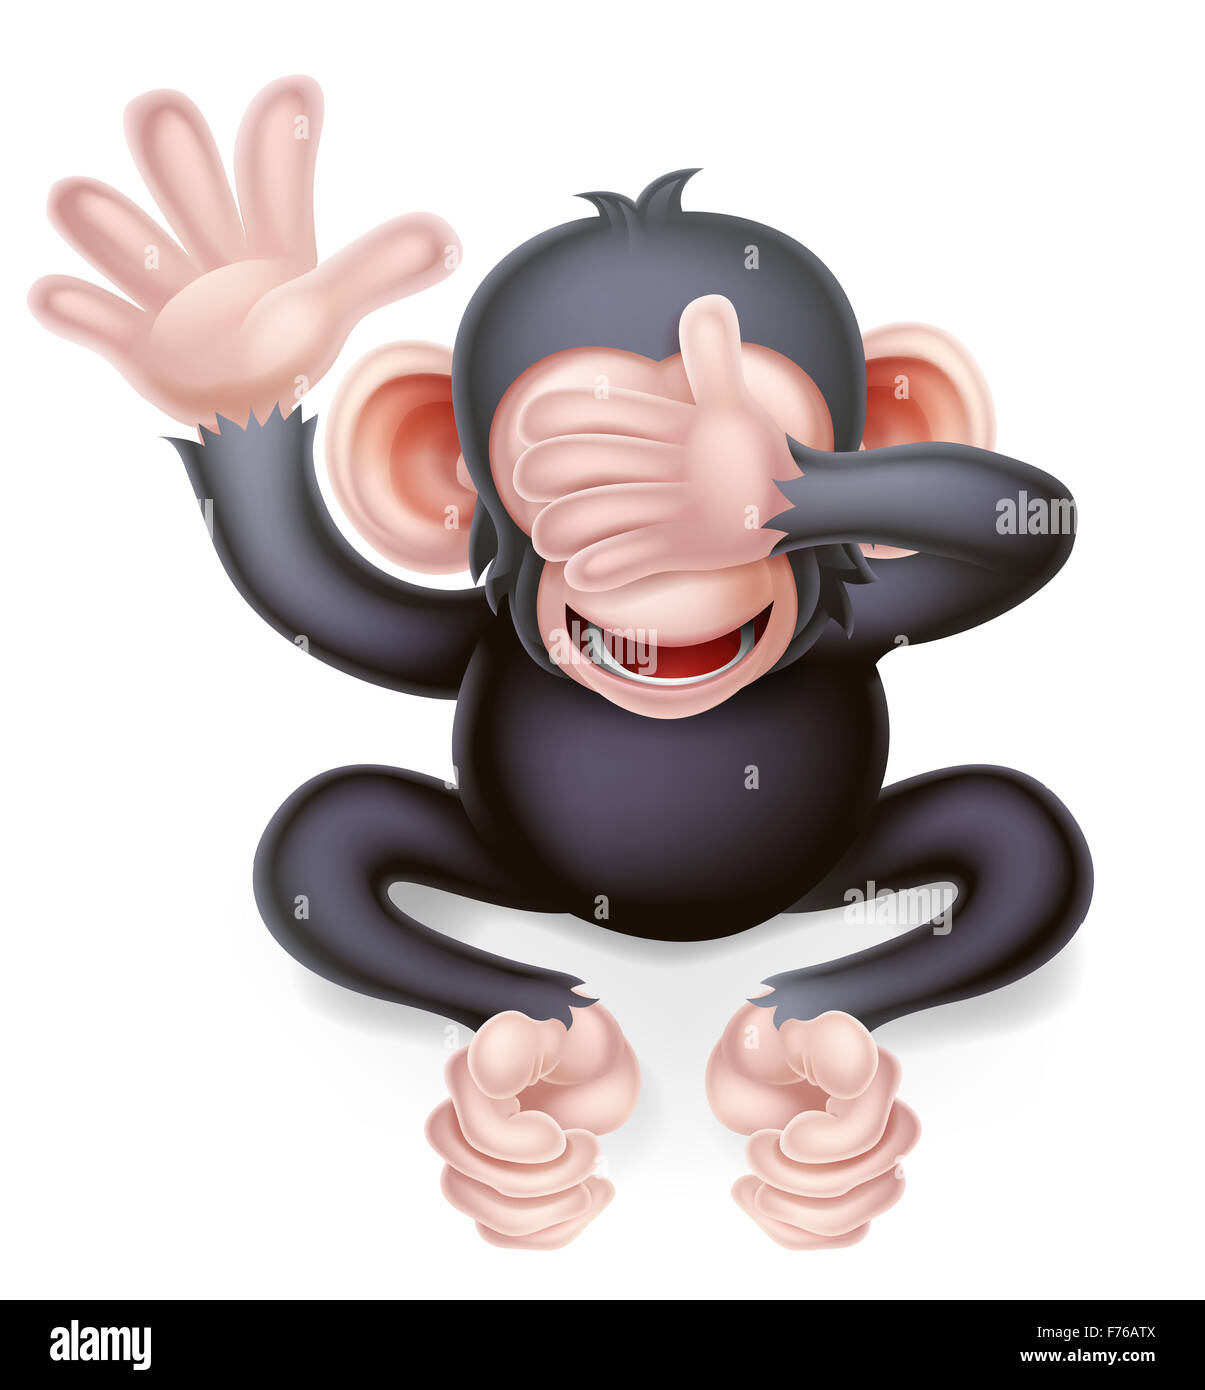 See no evil cartoon wise monkey covering his eyes Stock Photo